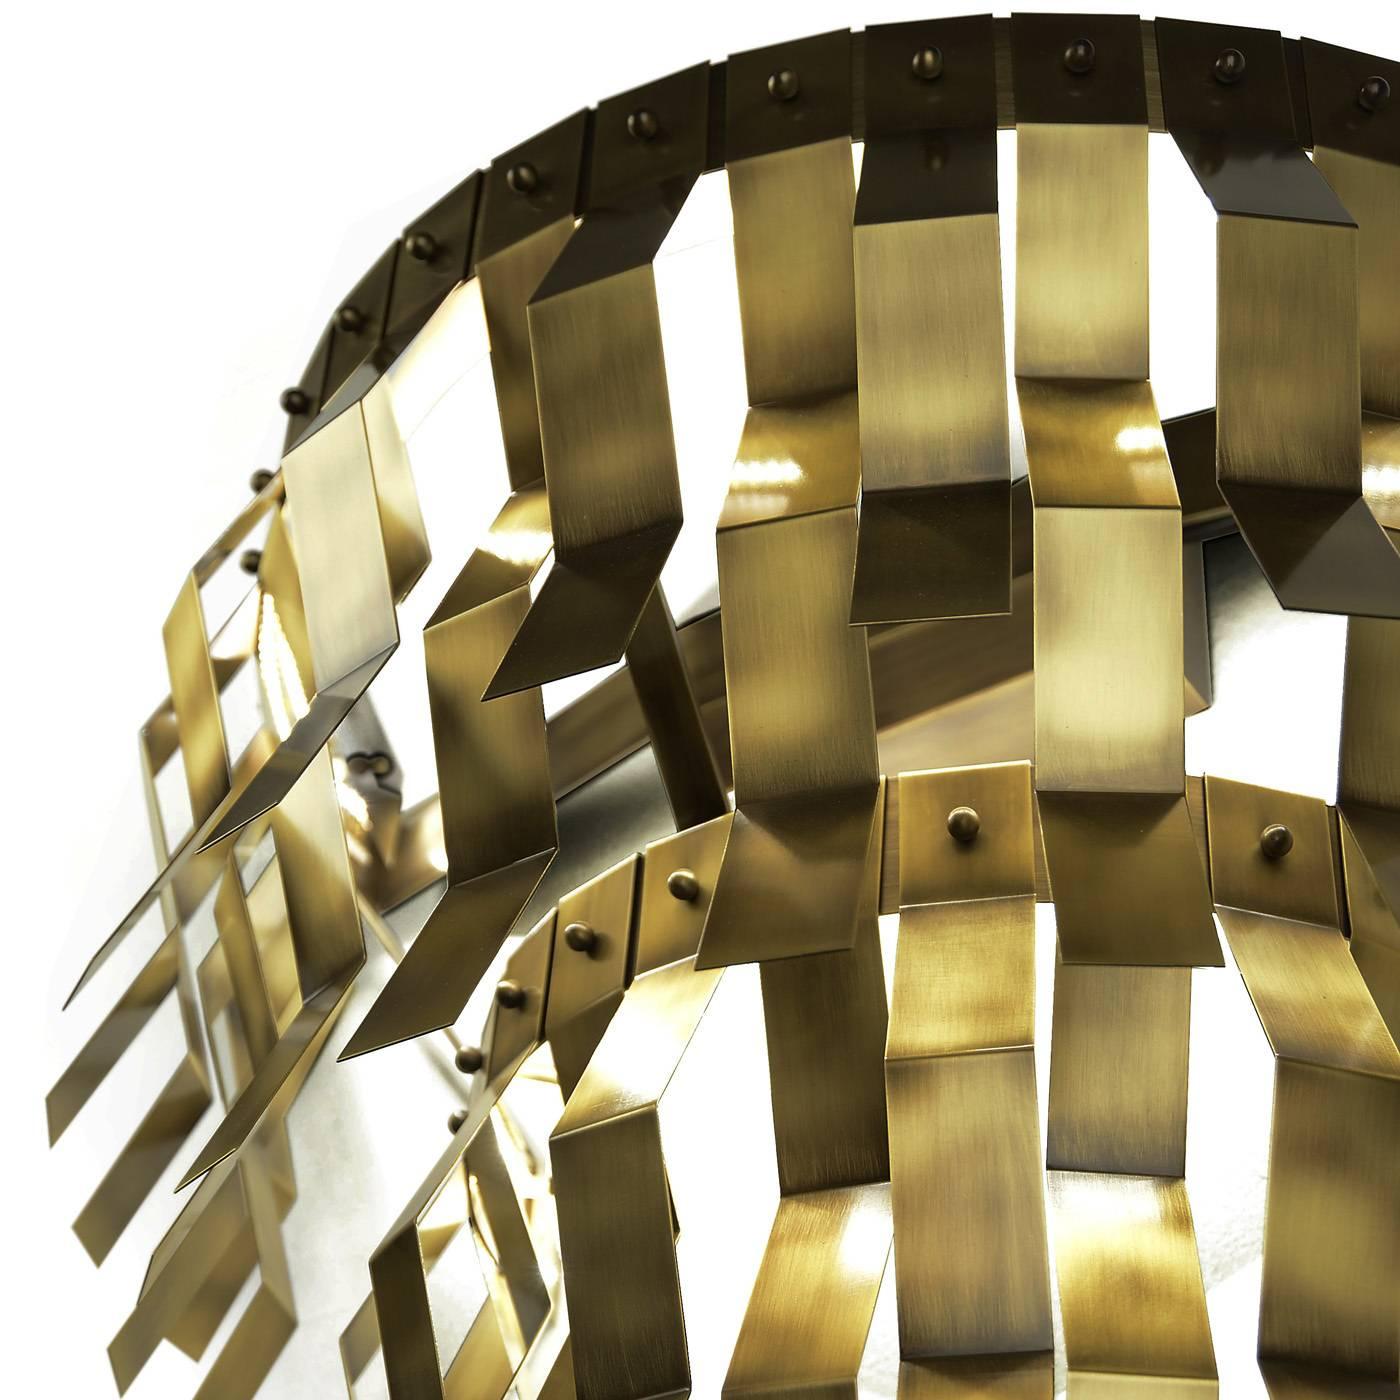 This striking brass sconce is decorated with geometrical metal accents that run all around its round perimeter and LED strip lighting.